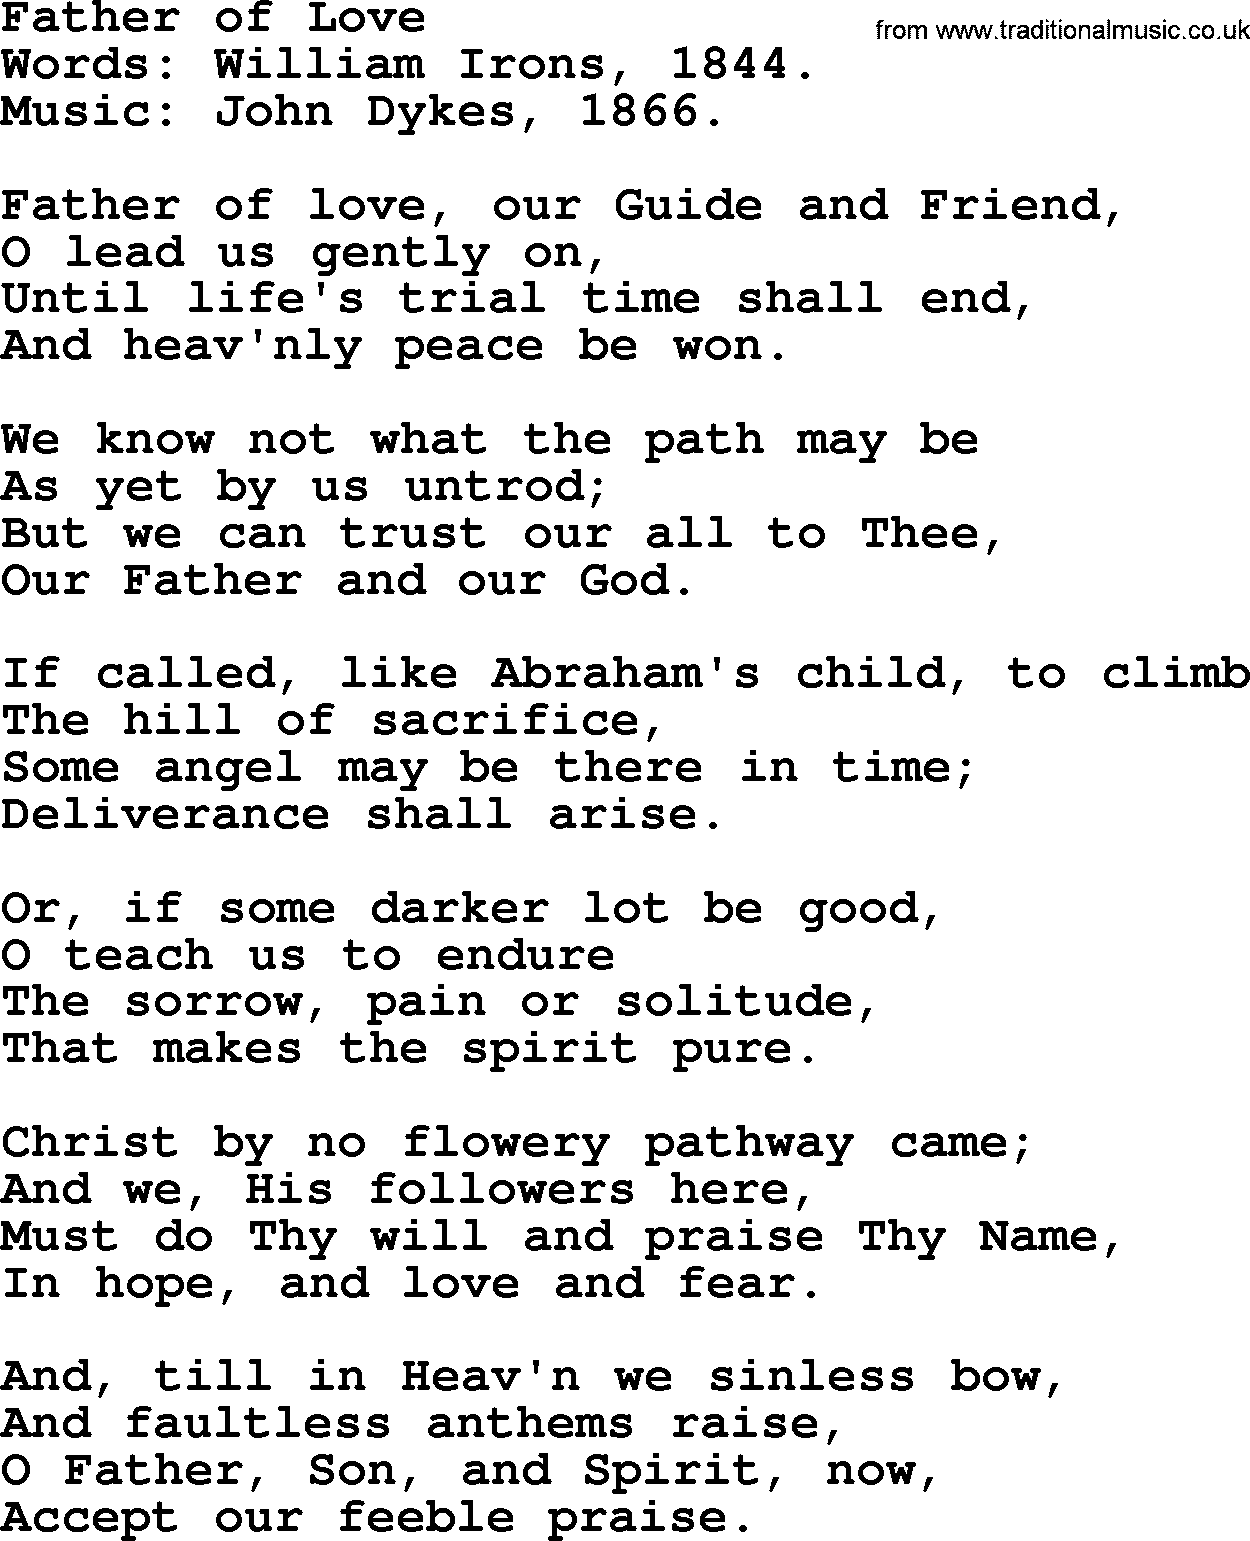 Hymns about Angels, Hymn: Father Of Love.txt lyrics with PDF